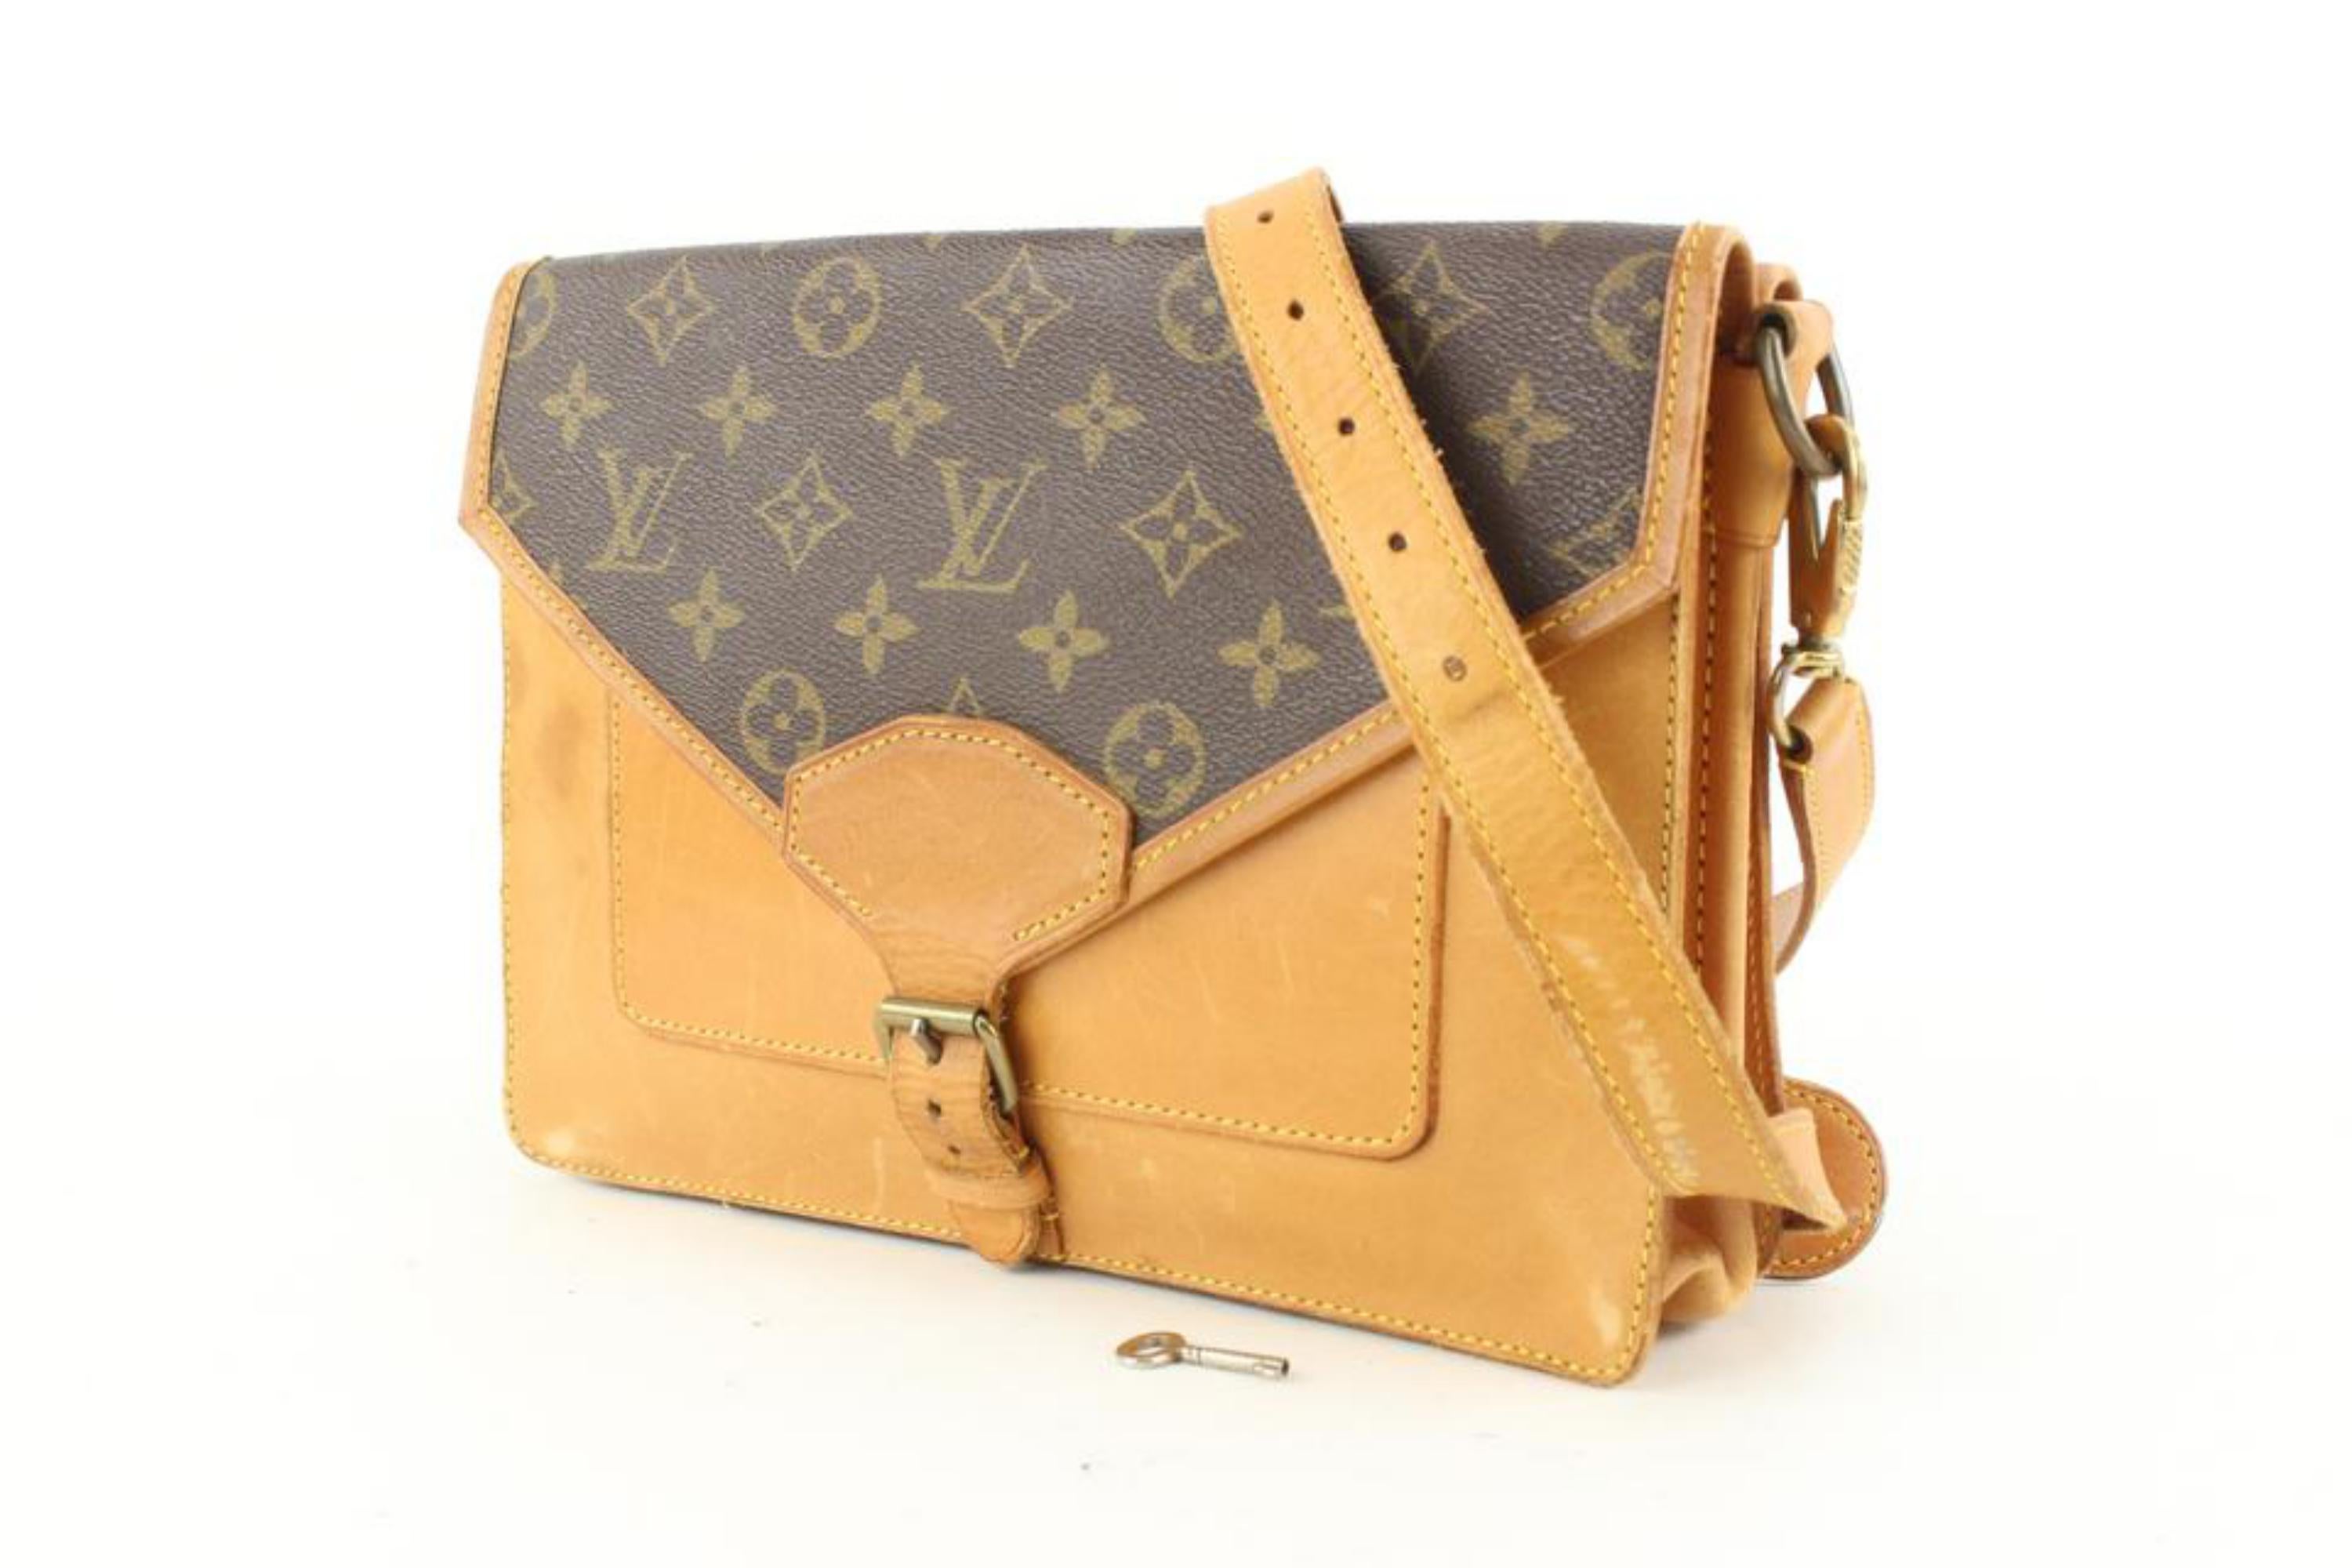 Biface Louis Vuitton Bag - 2 For Sale on 1stDibs